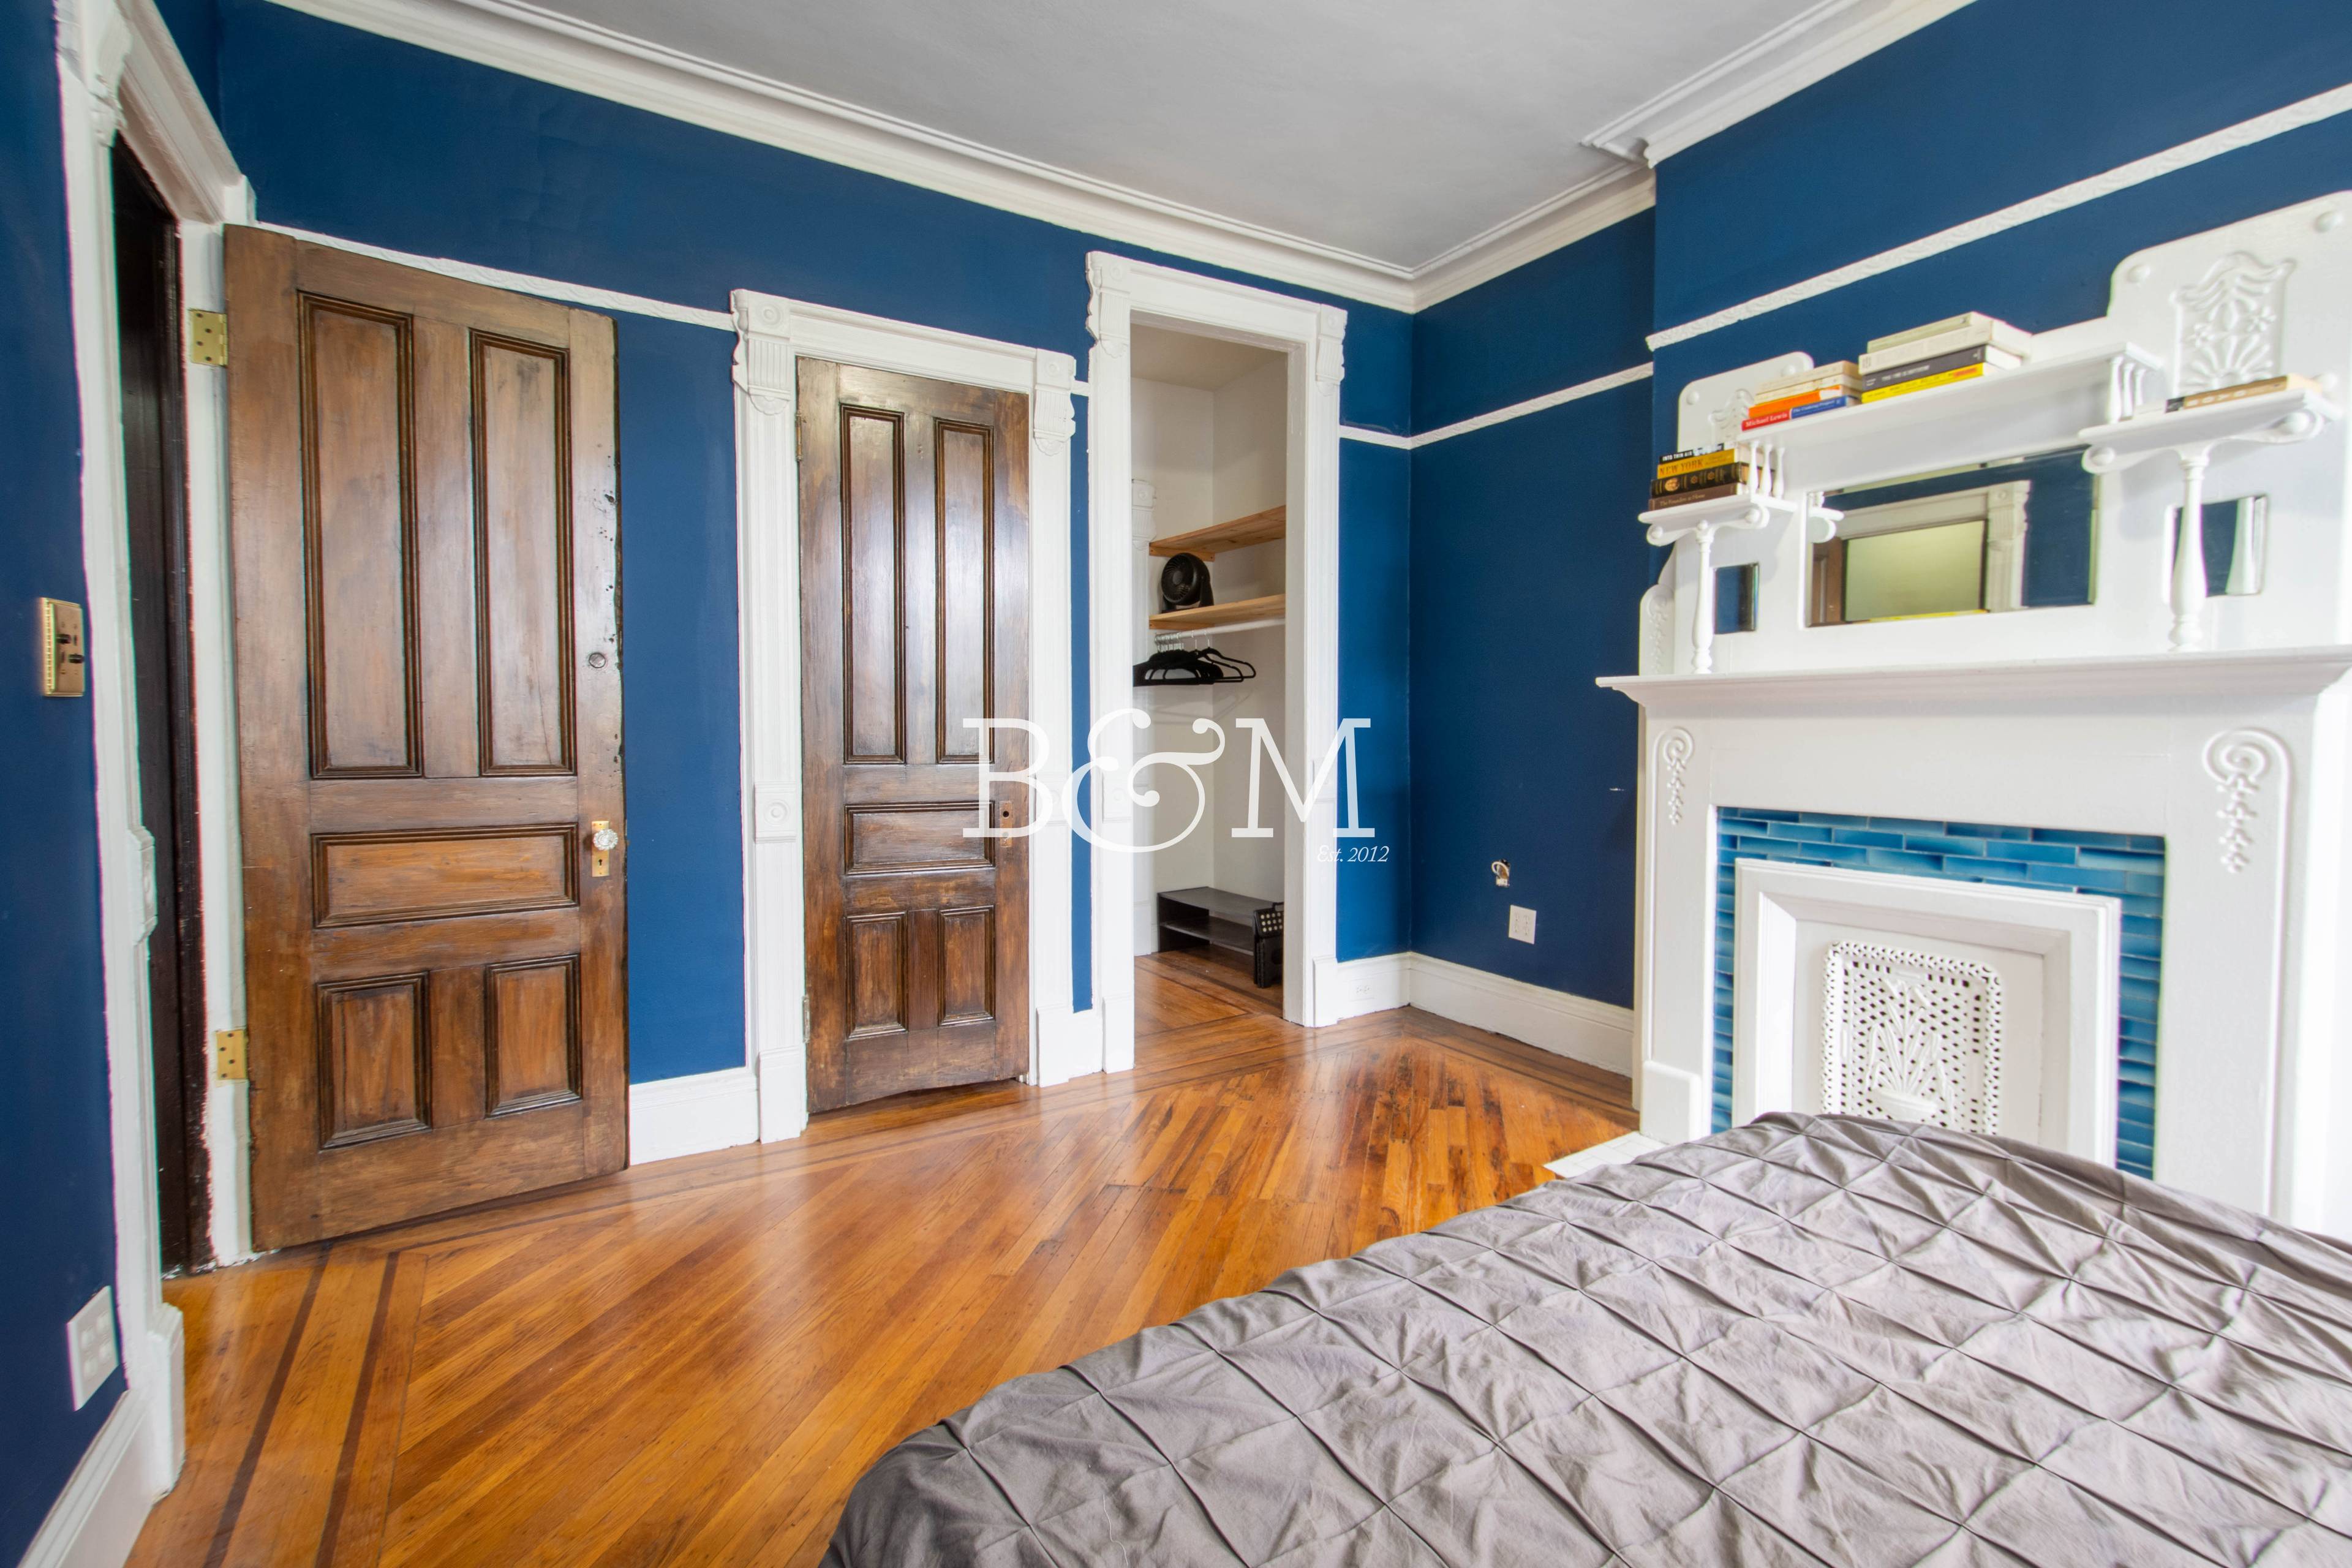 Our Thoughts This tastefully renovated Brownstone home in Bedford Stuyvesant is a Brownstone lovers dream.